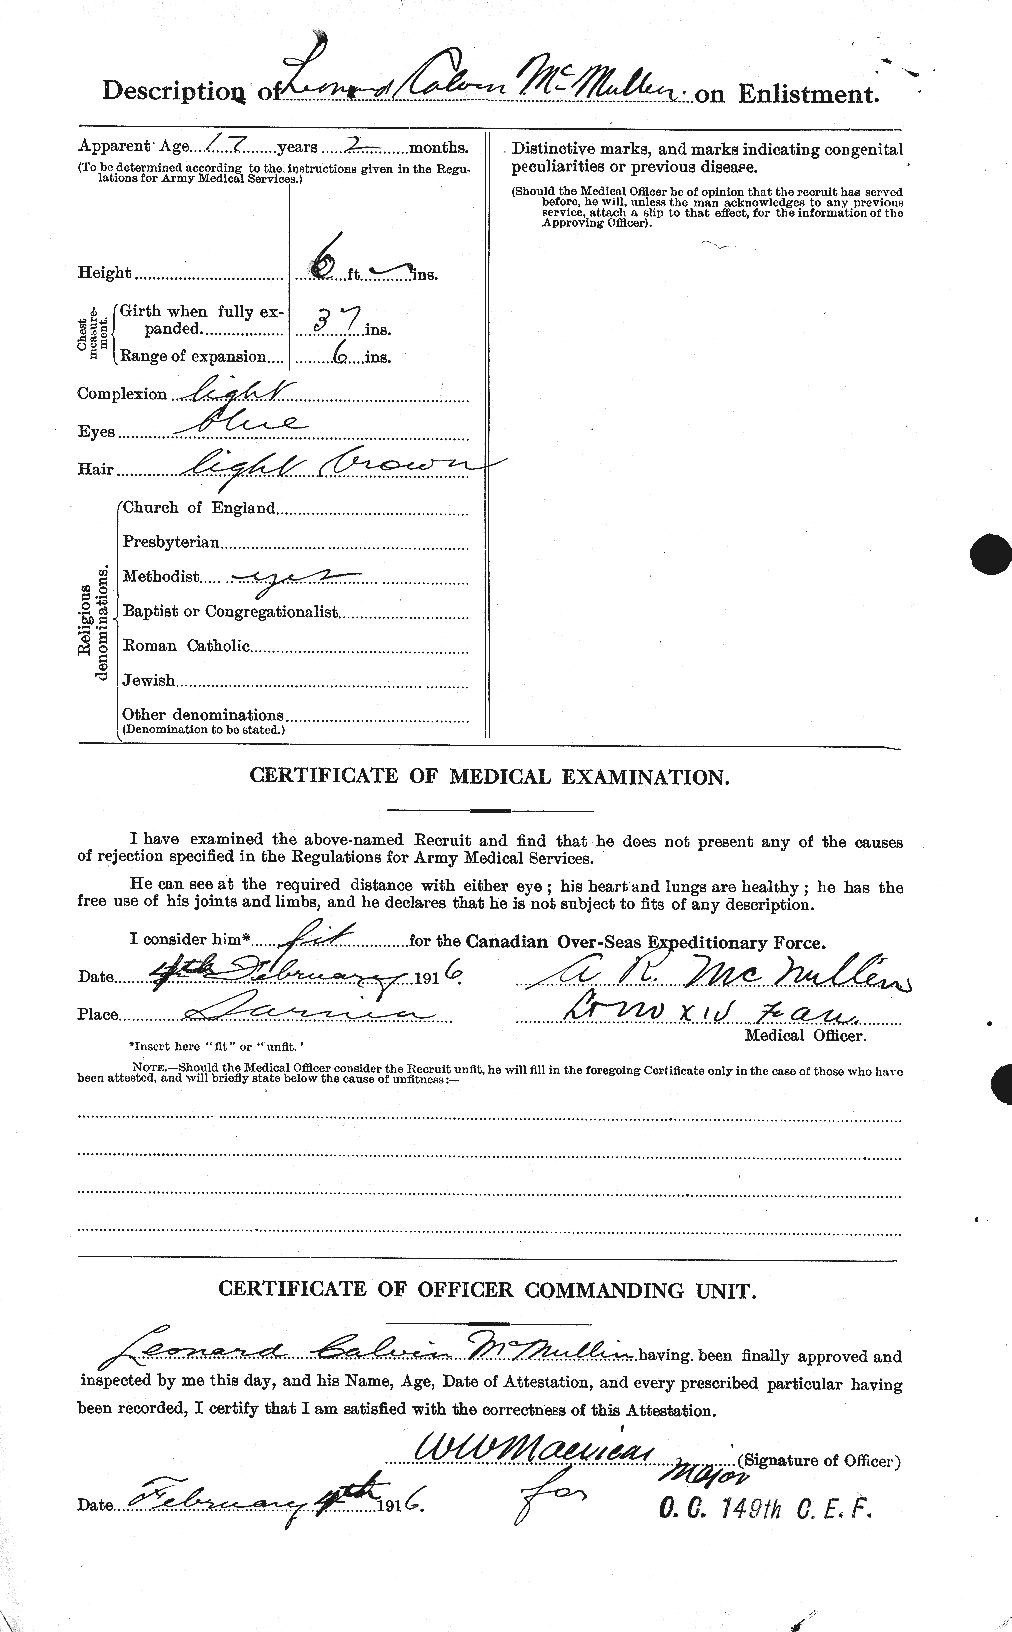 Personnel Records of the First World War - CEF 539314b